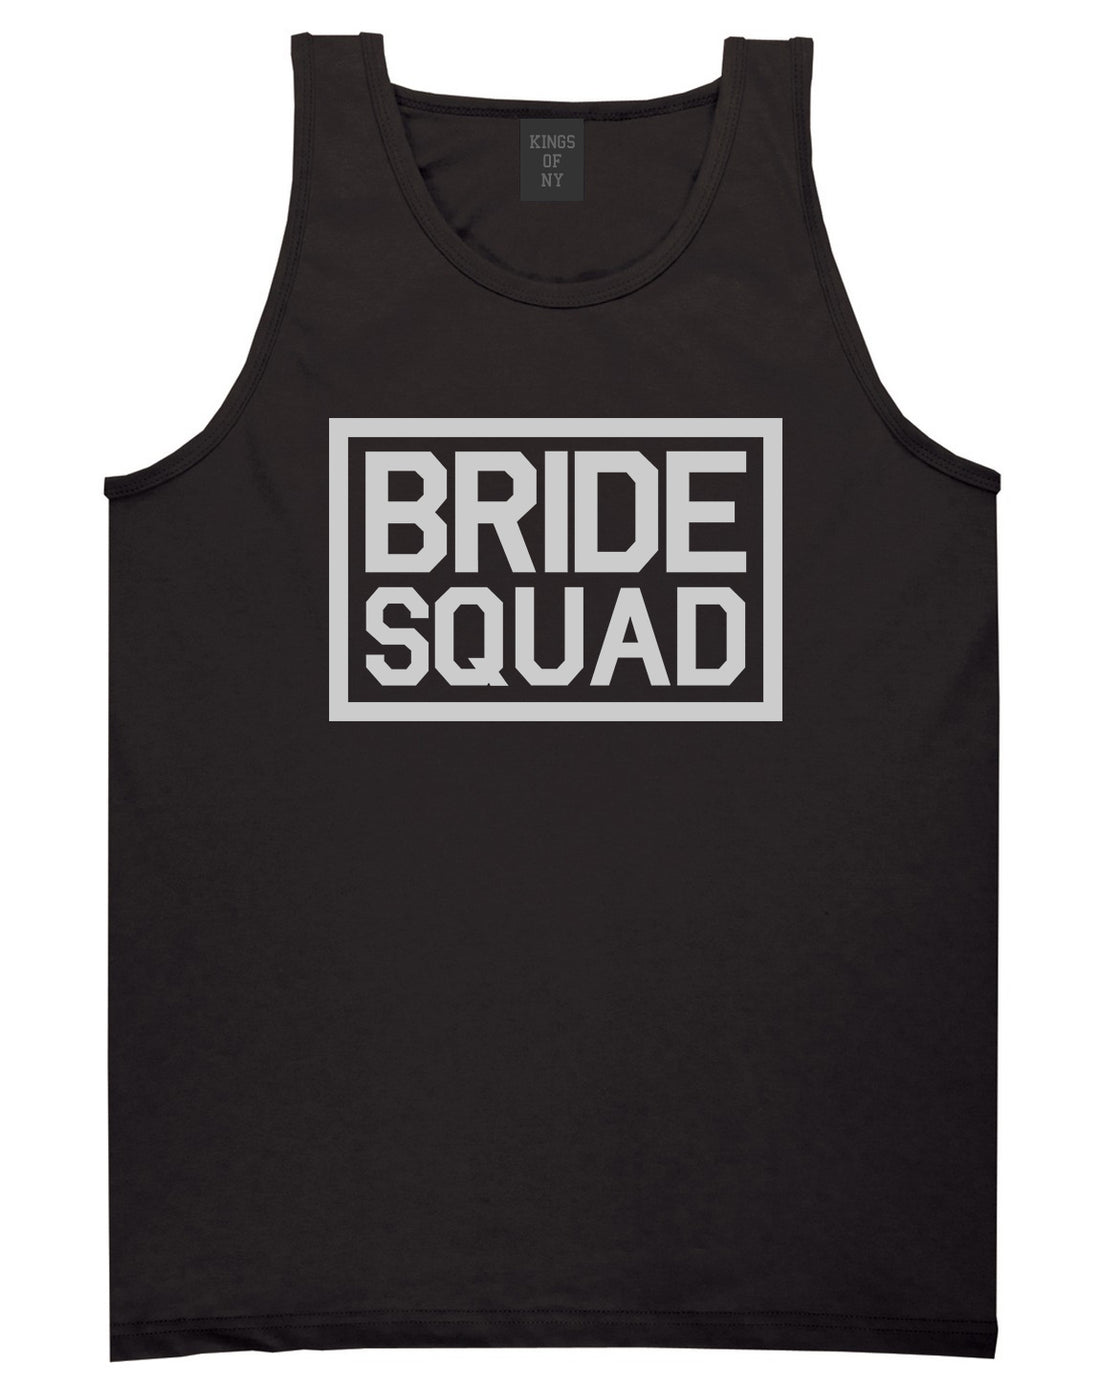 Bride Squad Bachlorette Party Black Tank Top Shirt by Kings Of NY